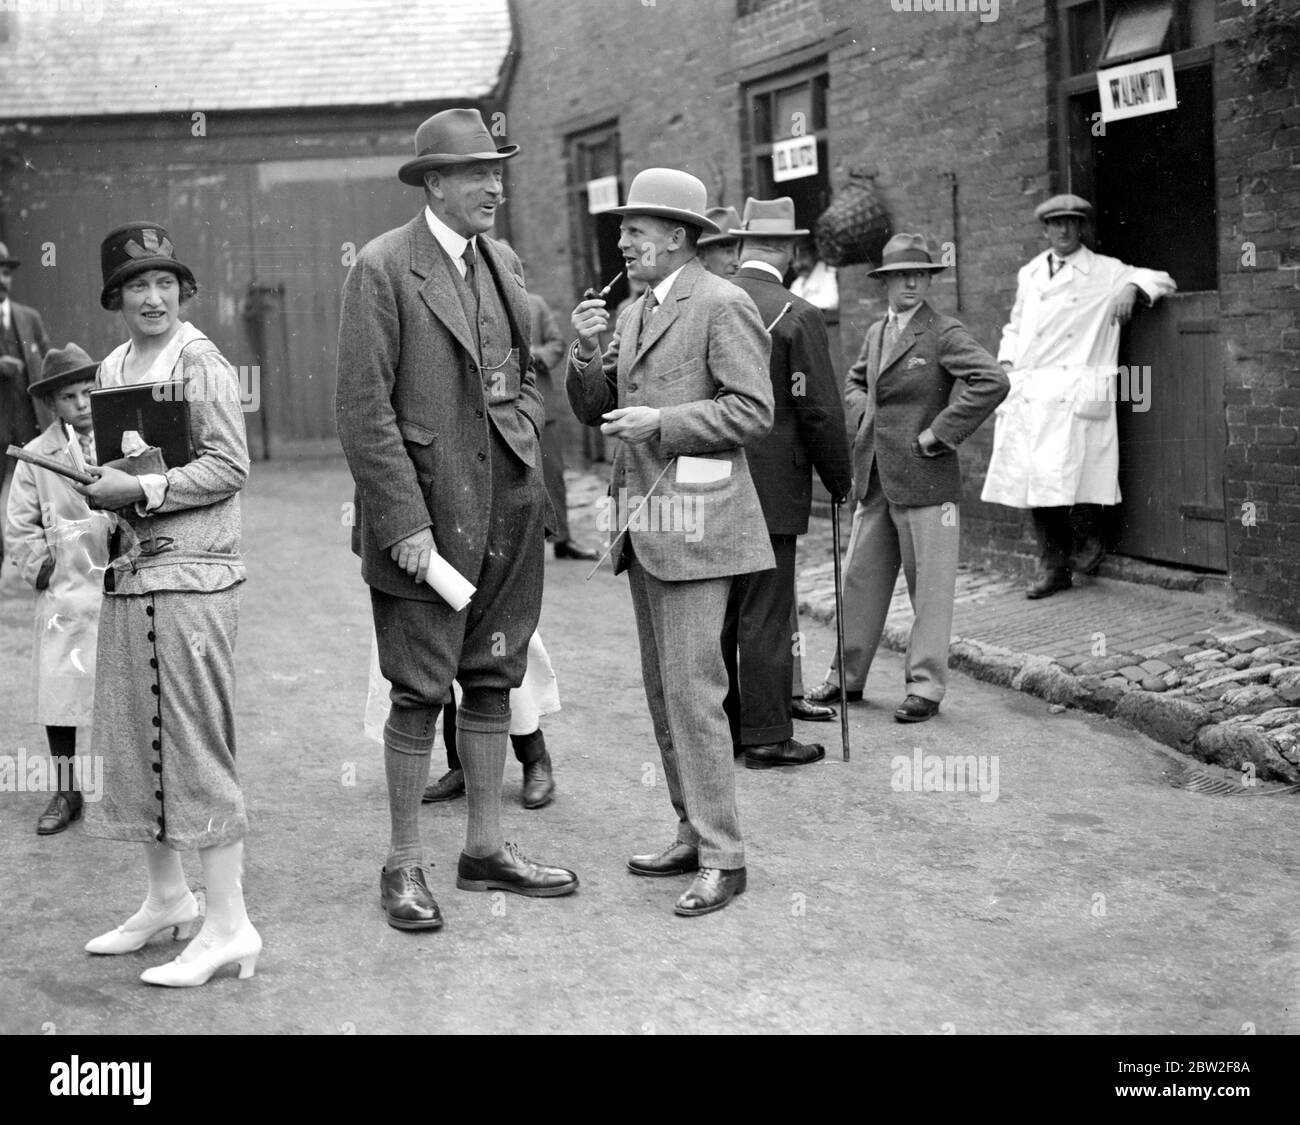 Basset Hounds show at The White Lion Hotel, Banbury. Col Burns Hartopp and Major G. Heseltine. 24 october 1934 Stock Photo